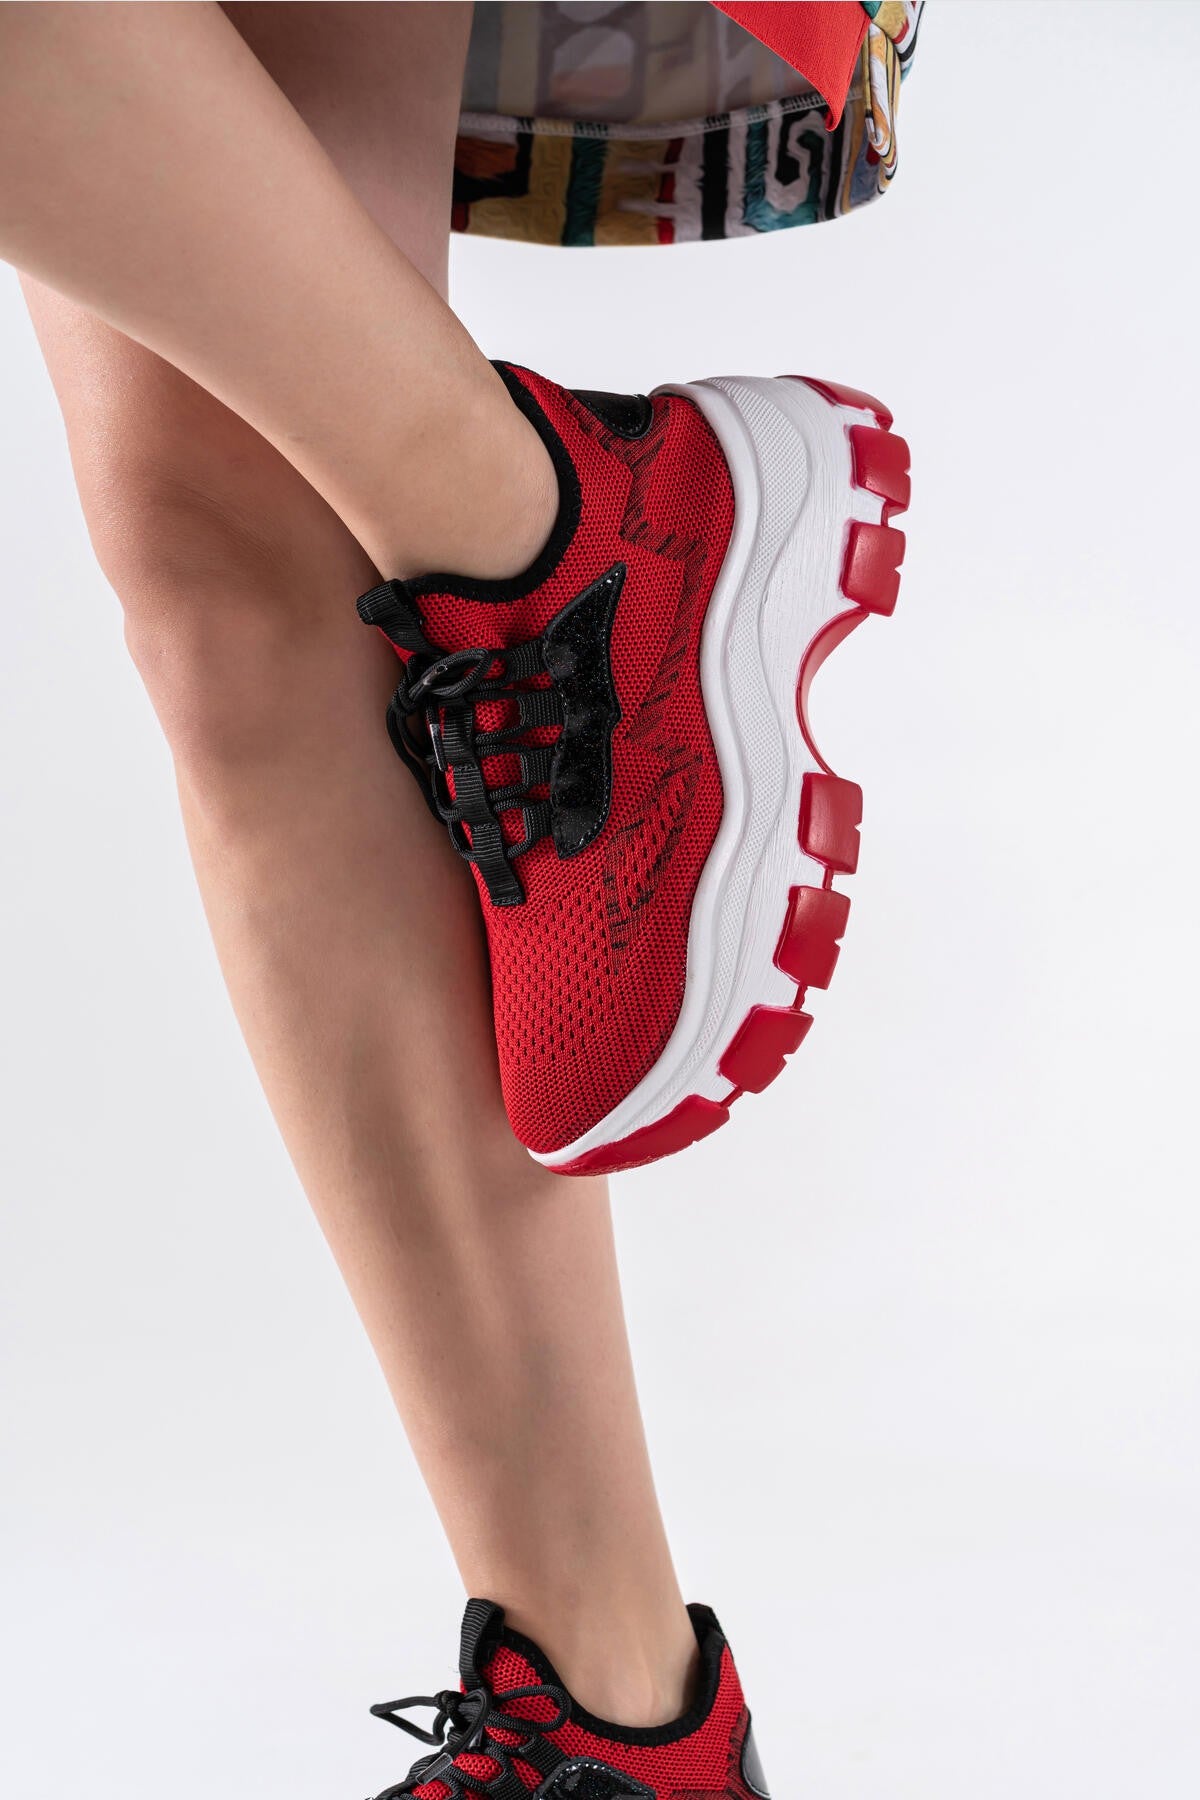 Women's Red Knitwear Lace-Up Sports Shoes - STREETMODE™